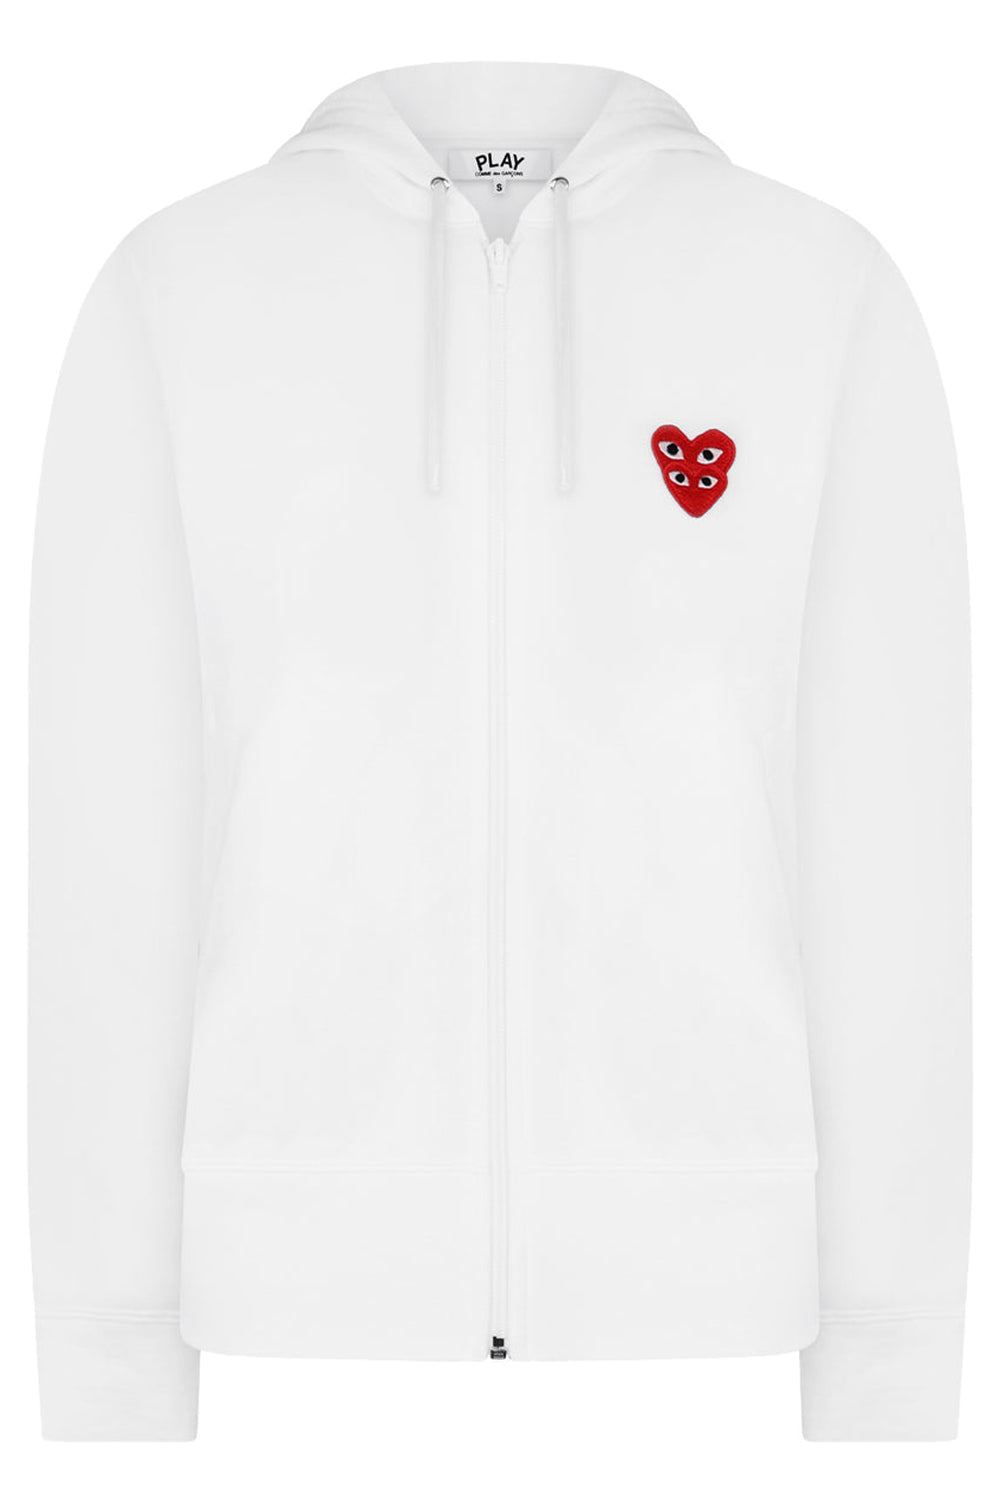 COMME DES GARCONS PLAY RTW PLAY DOUBLE HEART ZIP HOODY | WHITE/RED HEART